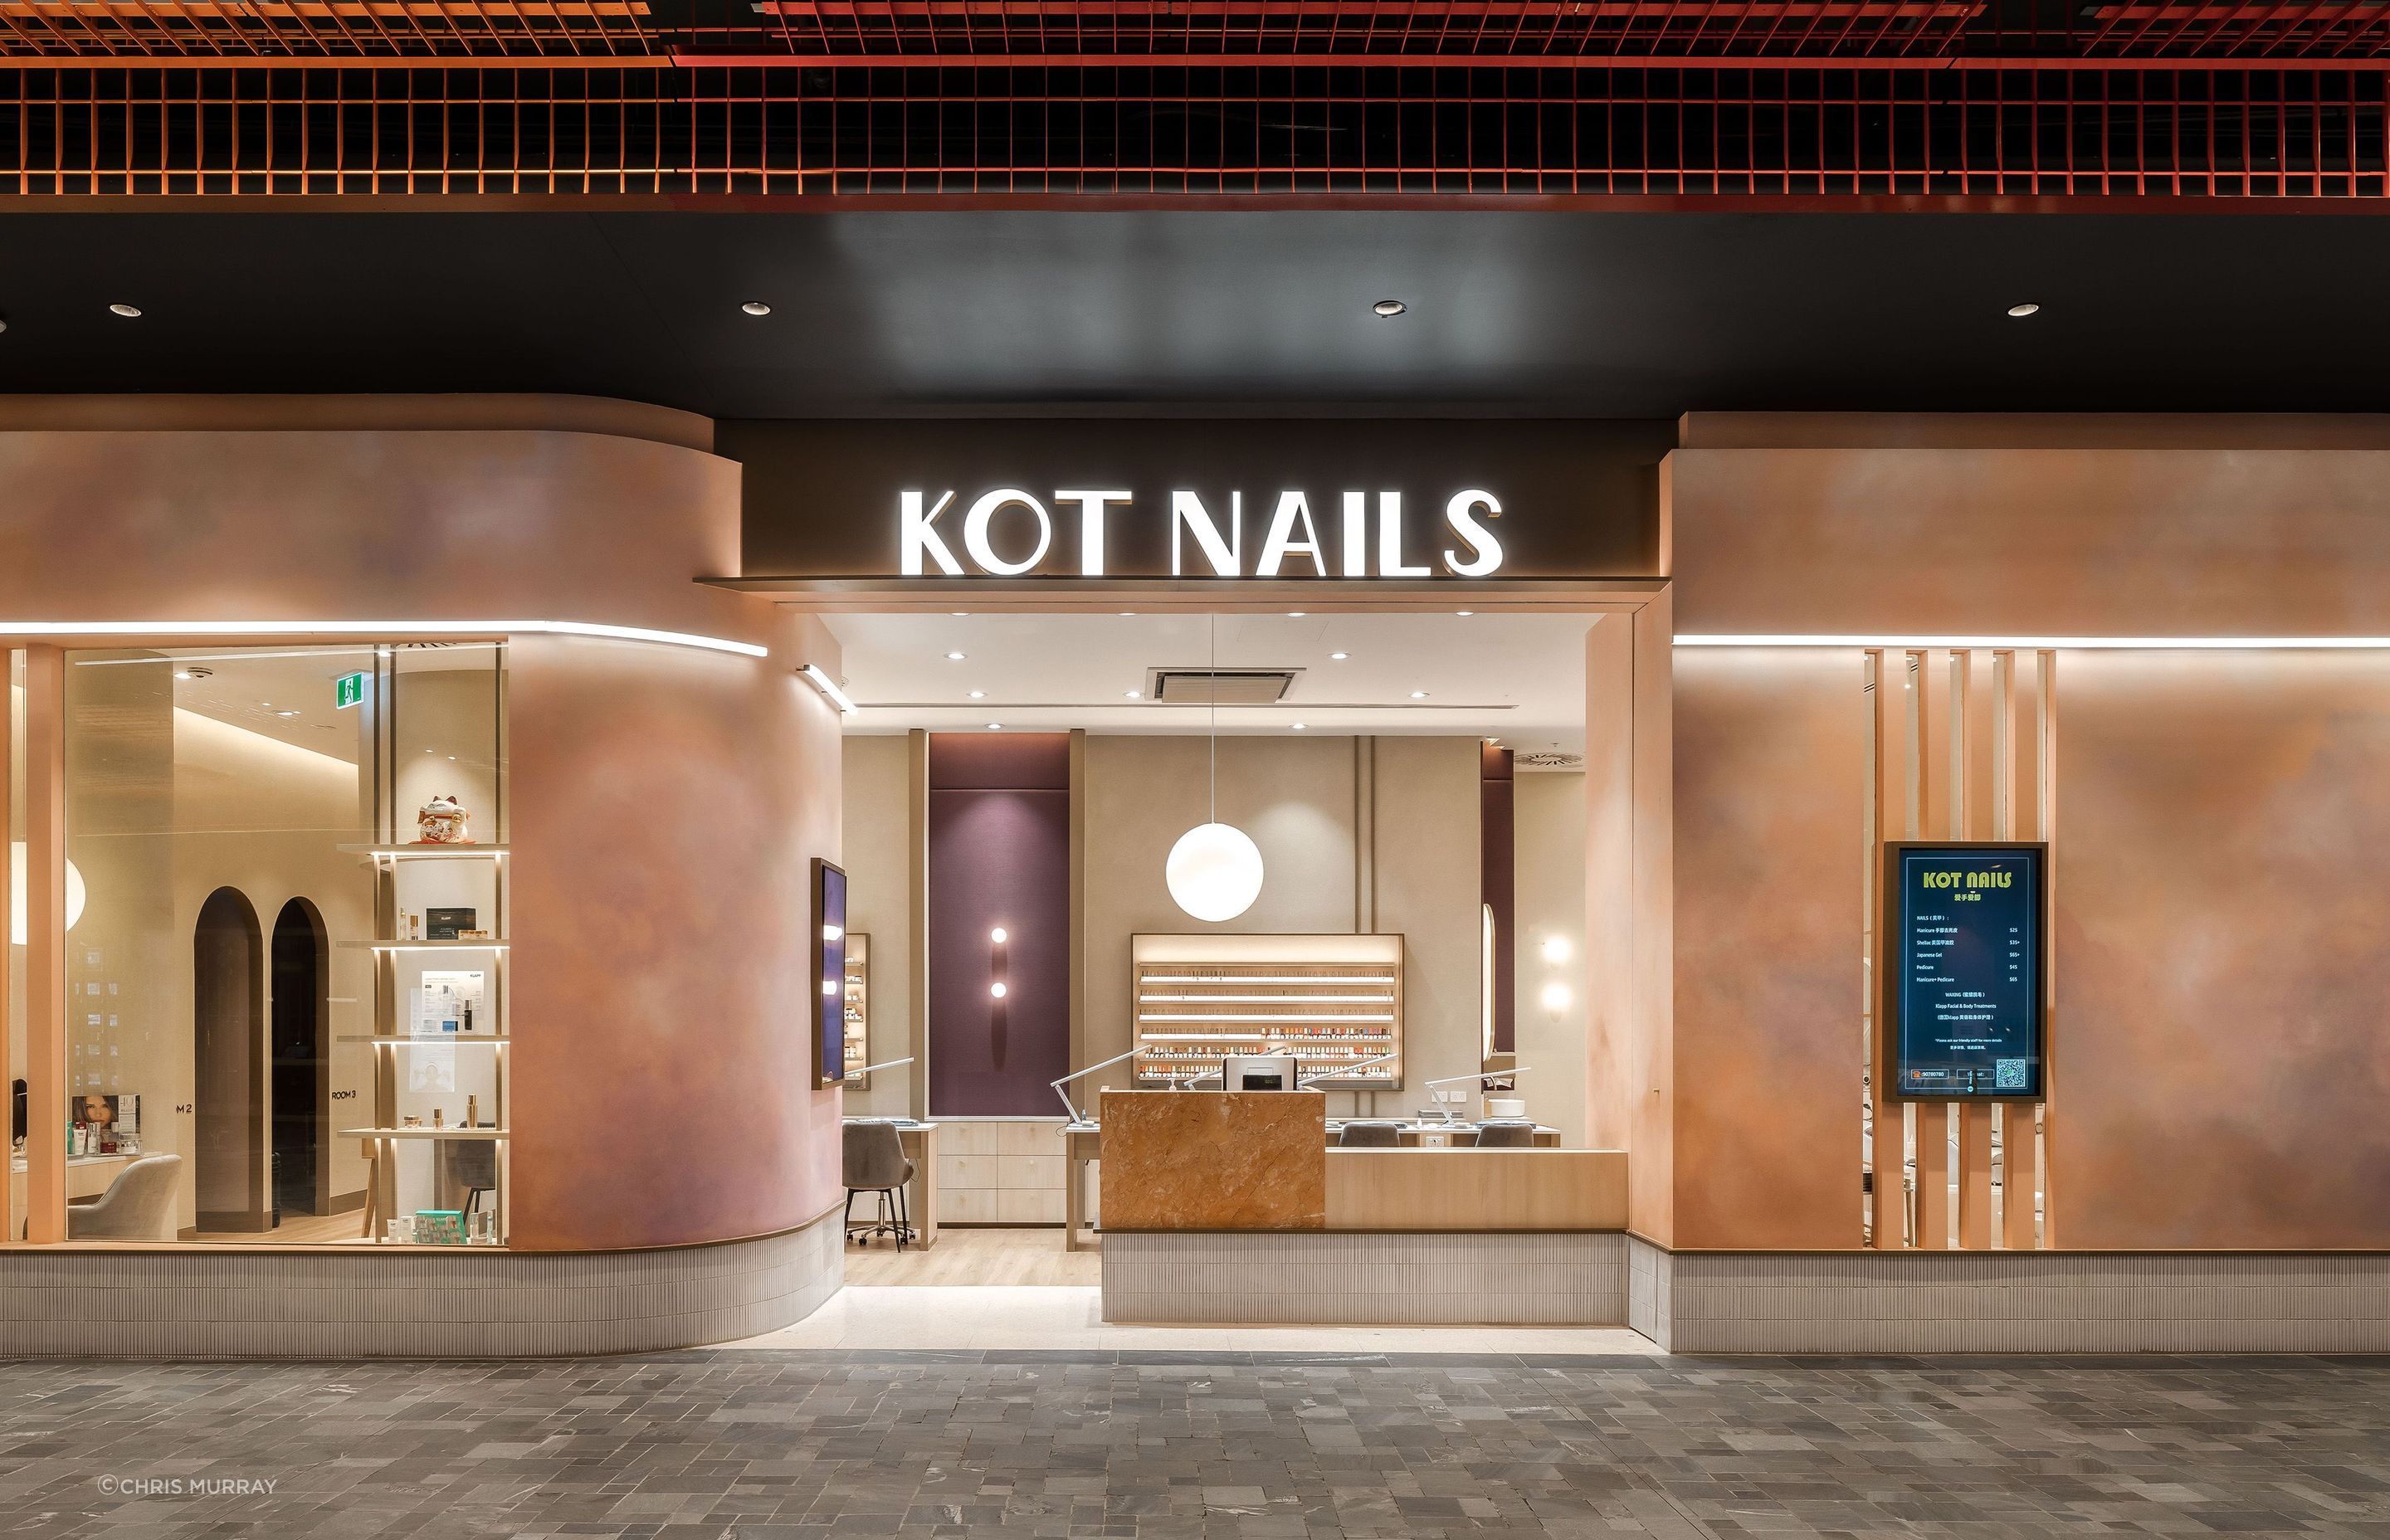 A nail spa reimagined as a form of escapism.